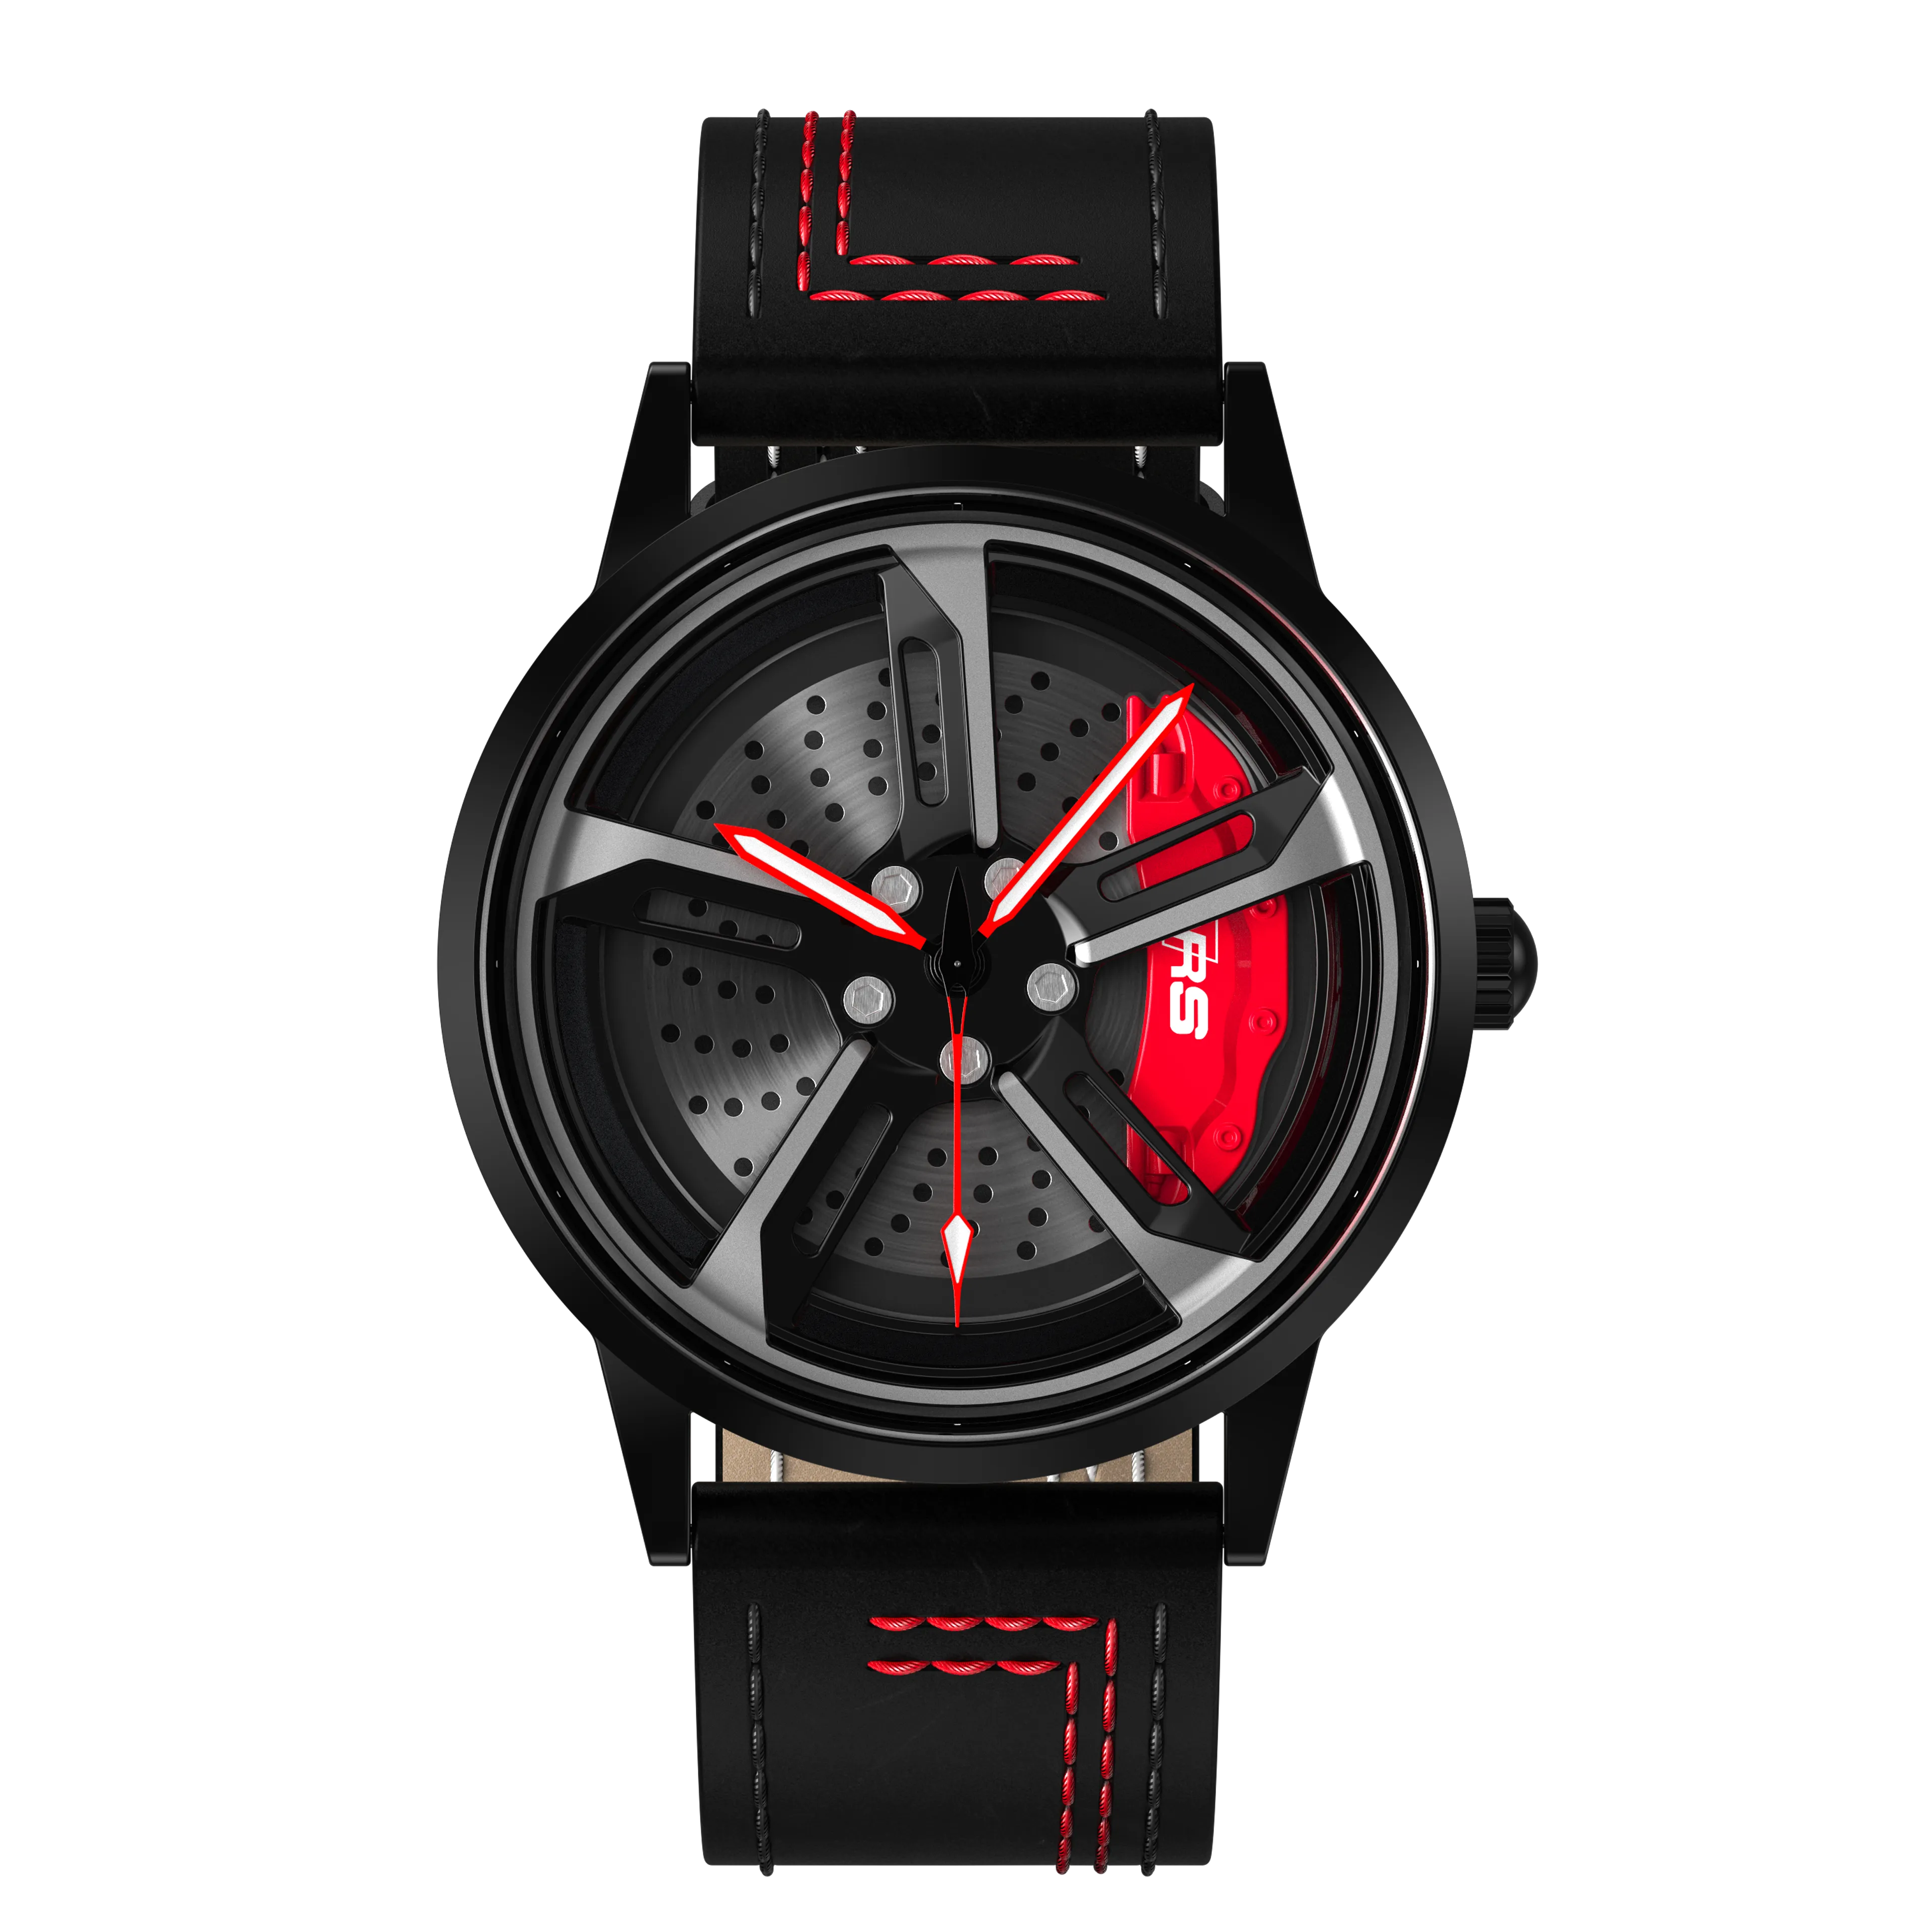 Shop Red Vorsprung RS7 Gyro - Red Leather Strap | RS Chrono